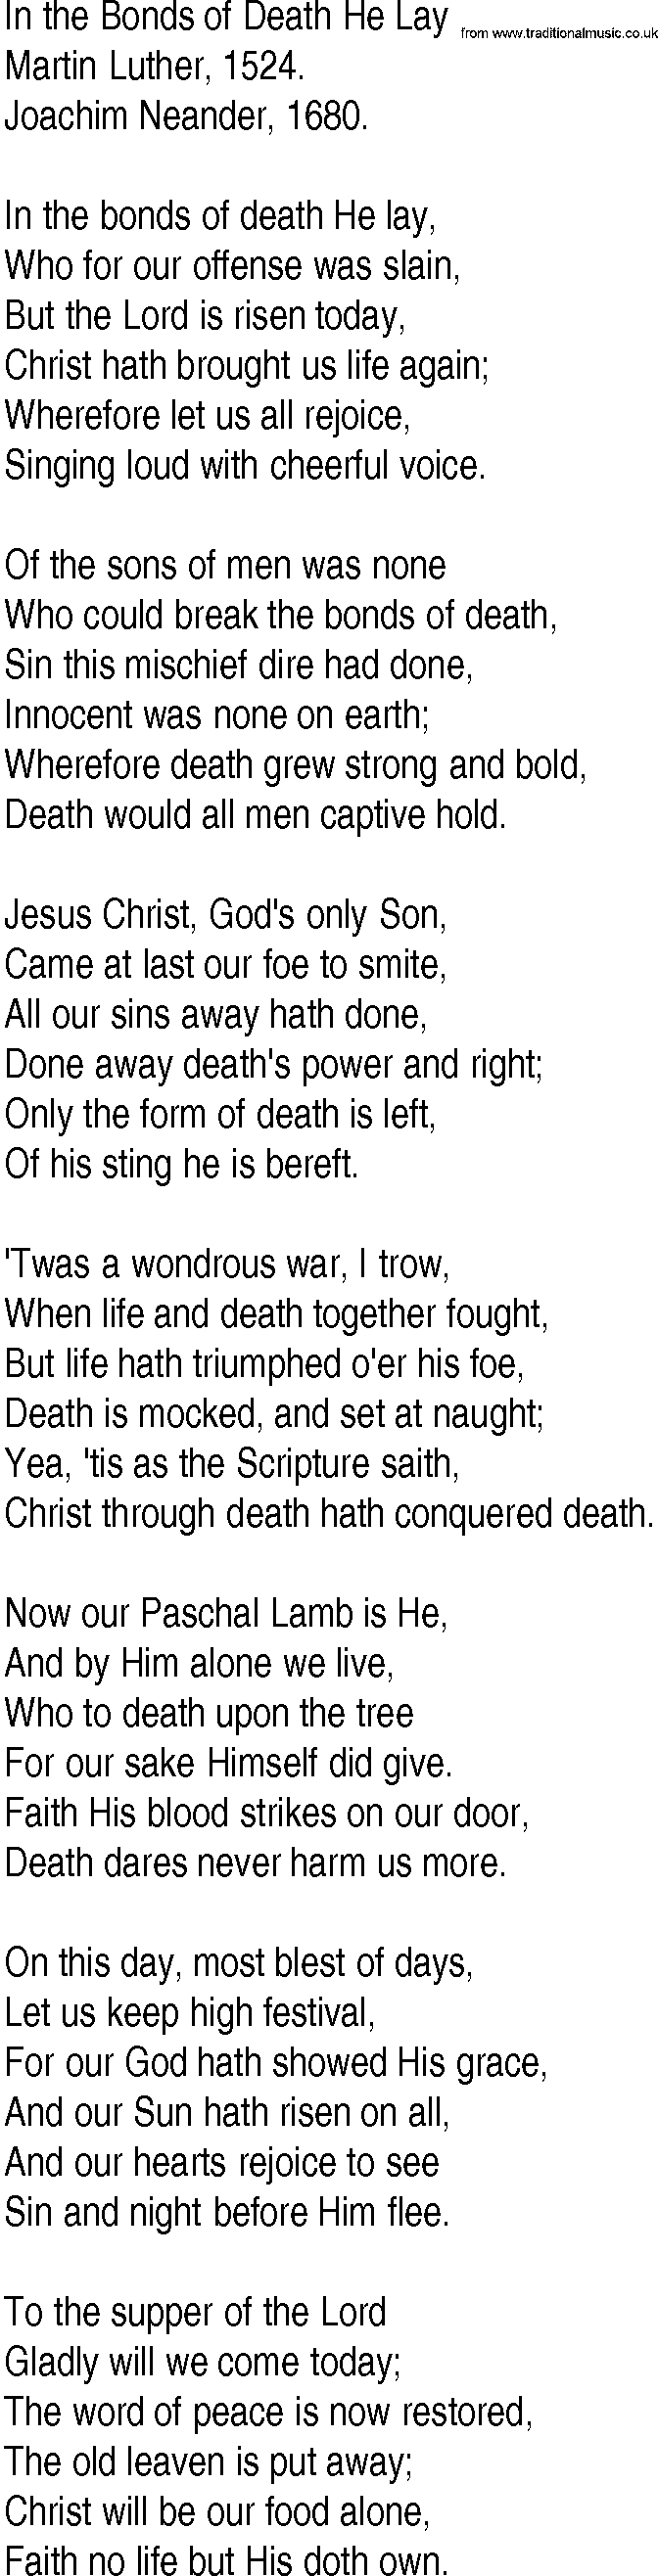 Hymn and Gospel Song: In the Bonds of Death He Lay by Martin Luther lyrics